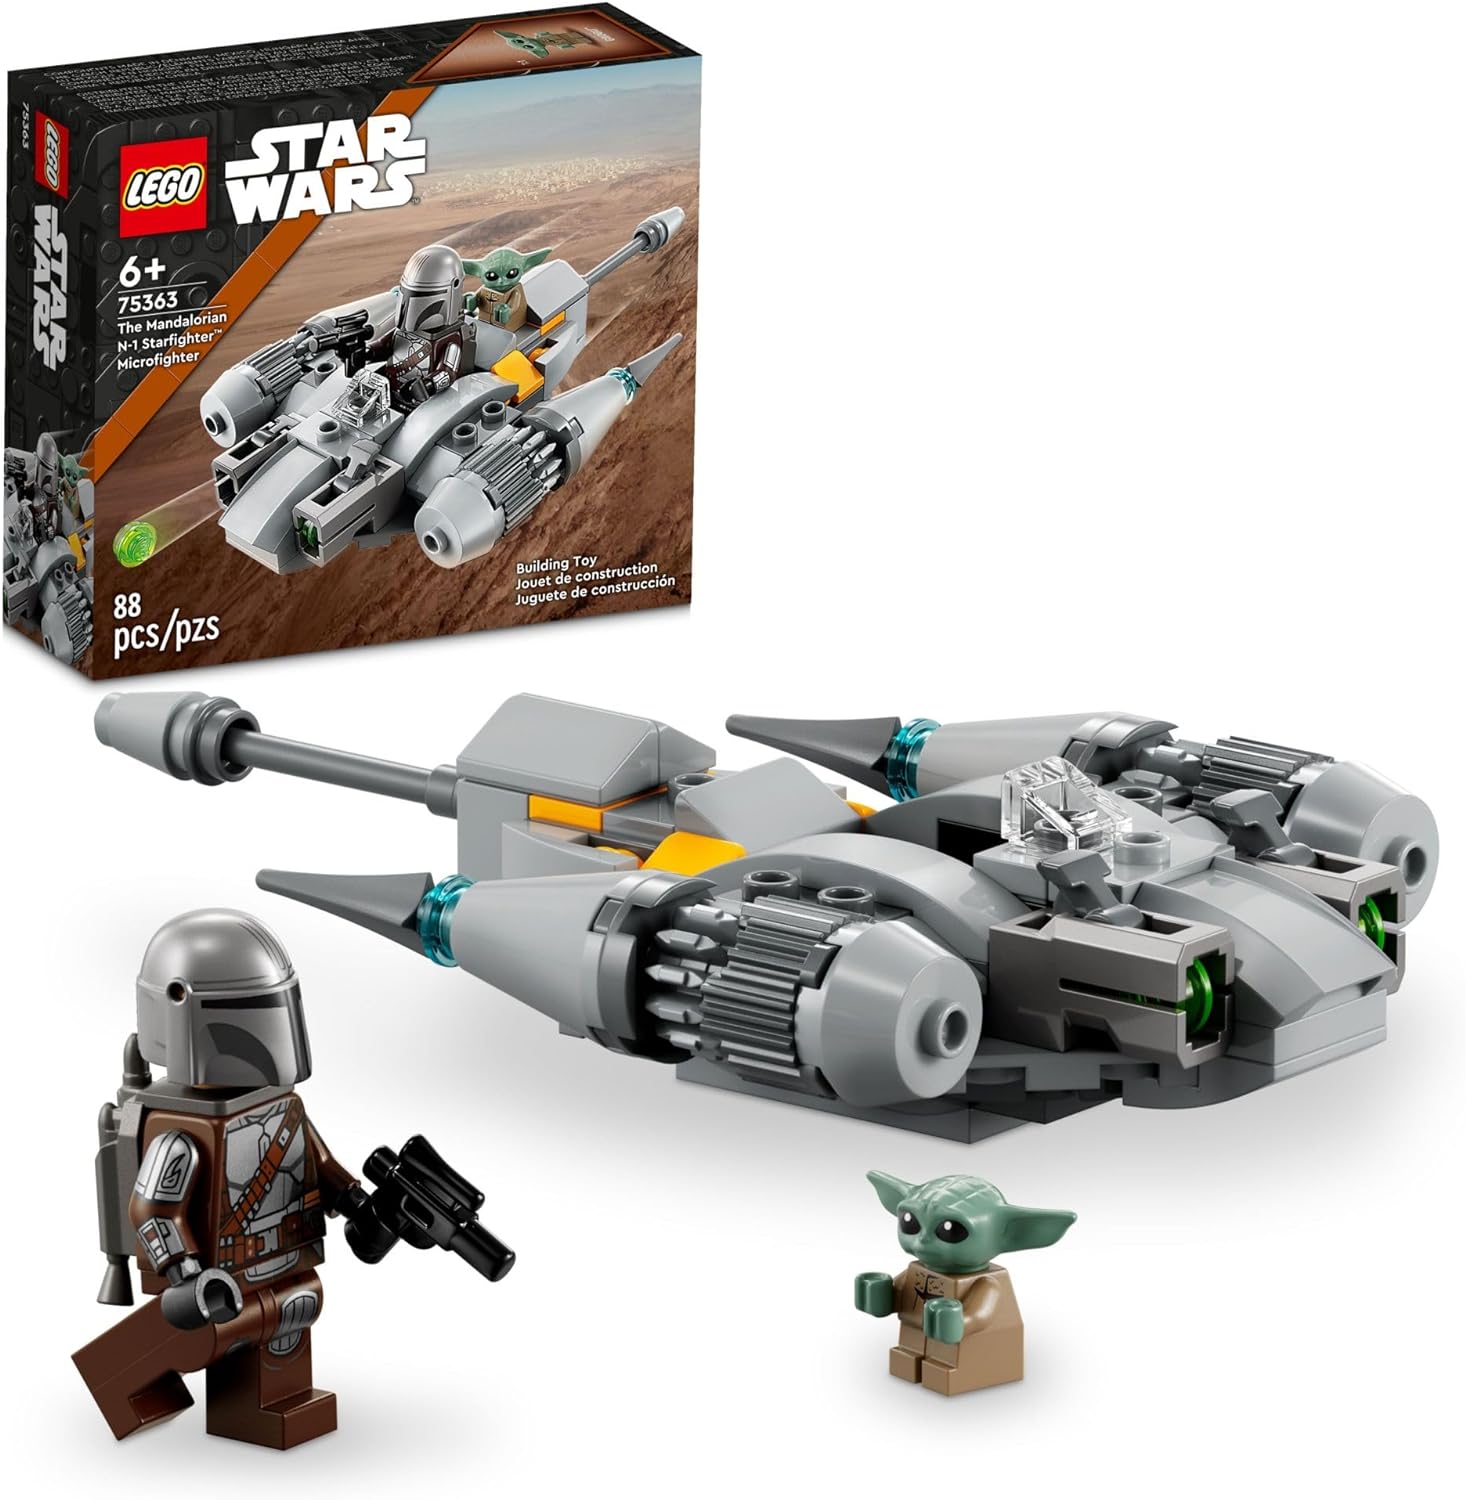 LEGO Star Wars The Mandalorian’s N-1 Starfighter Microfighter Set – Only $11.19!